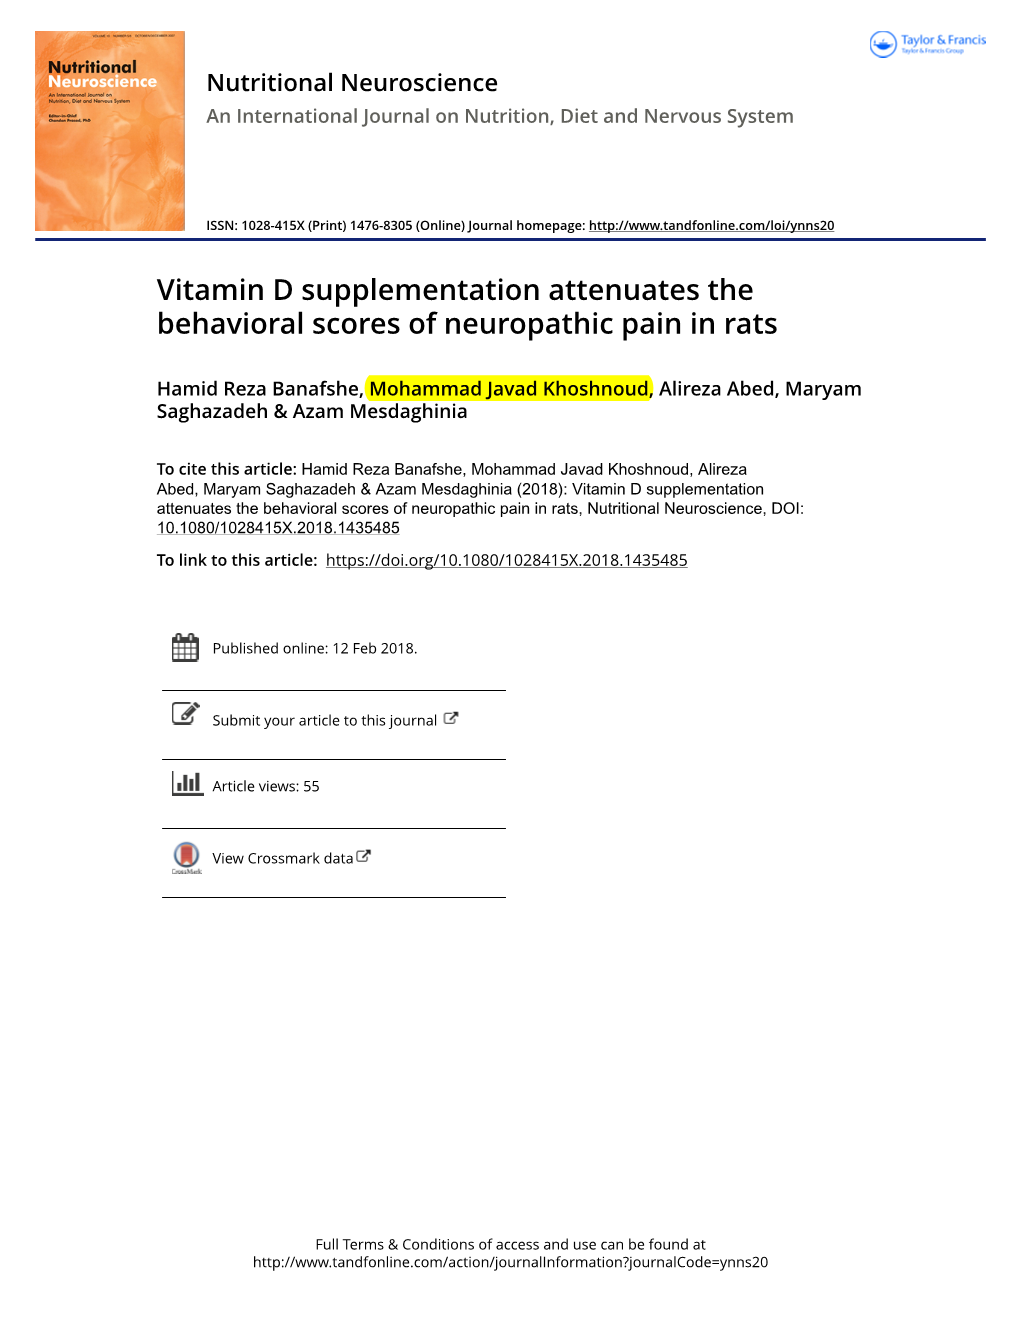 Vitamin D Supplementation Attenuates the Behavioral Scores of Neuropathic Pain in Rats